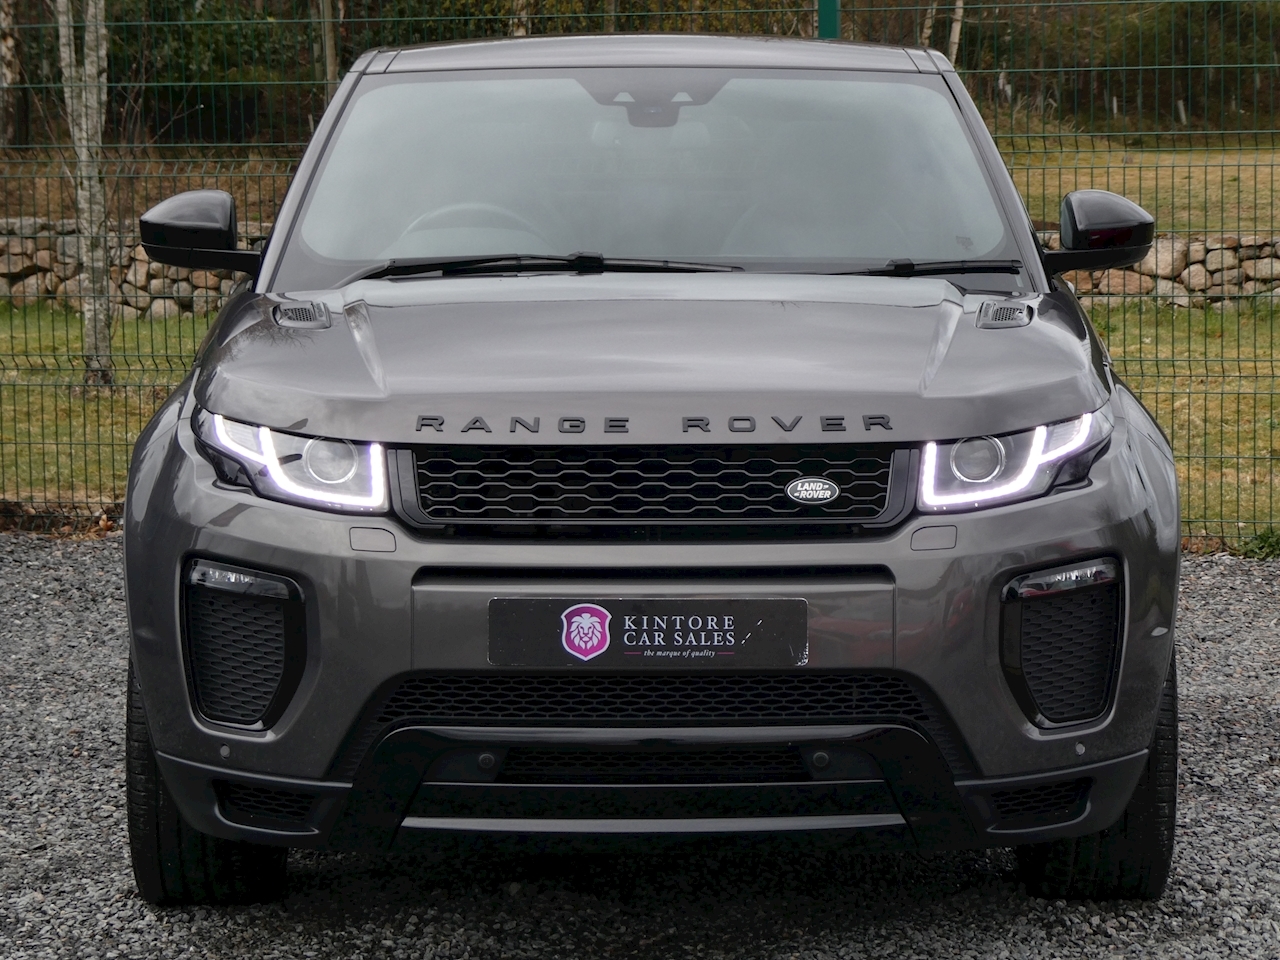 Range Rover Evoque 2.0 TD4 HSE Dynamic 4WD Auto 2.0 5dr SUV Automatic Diesel